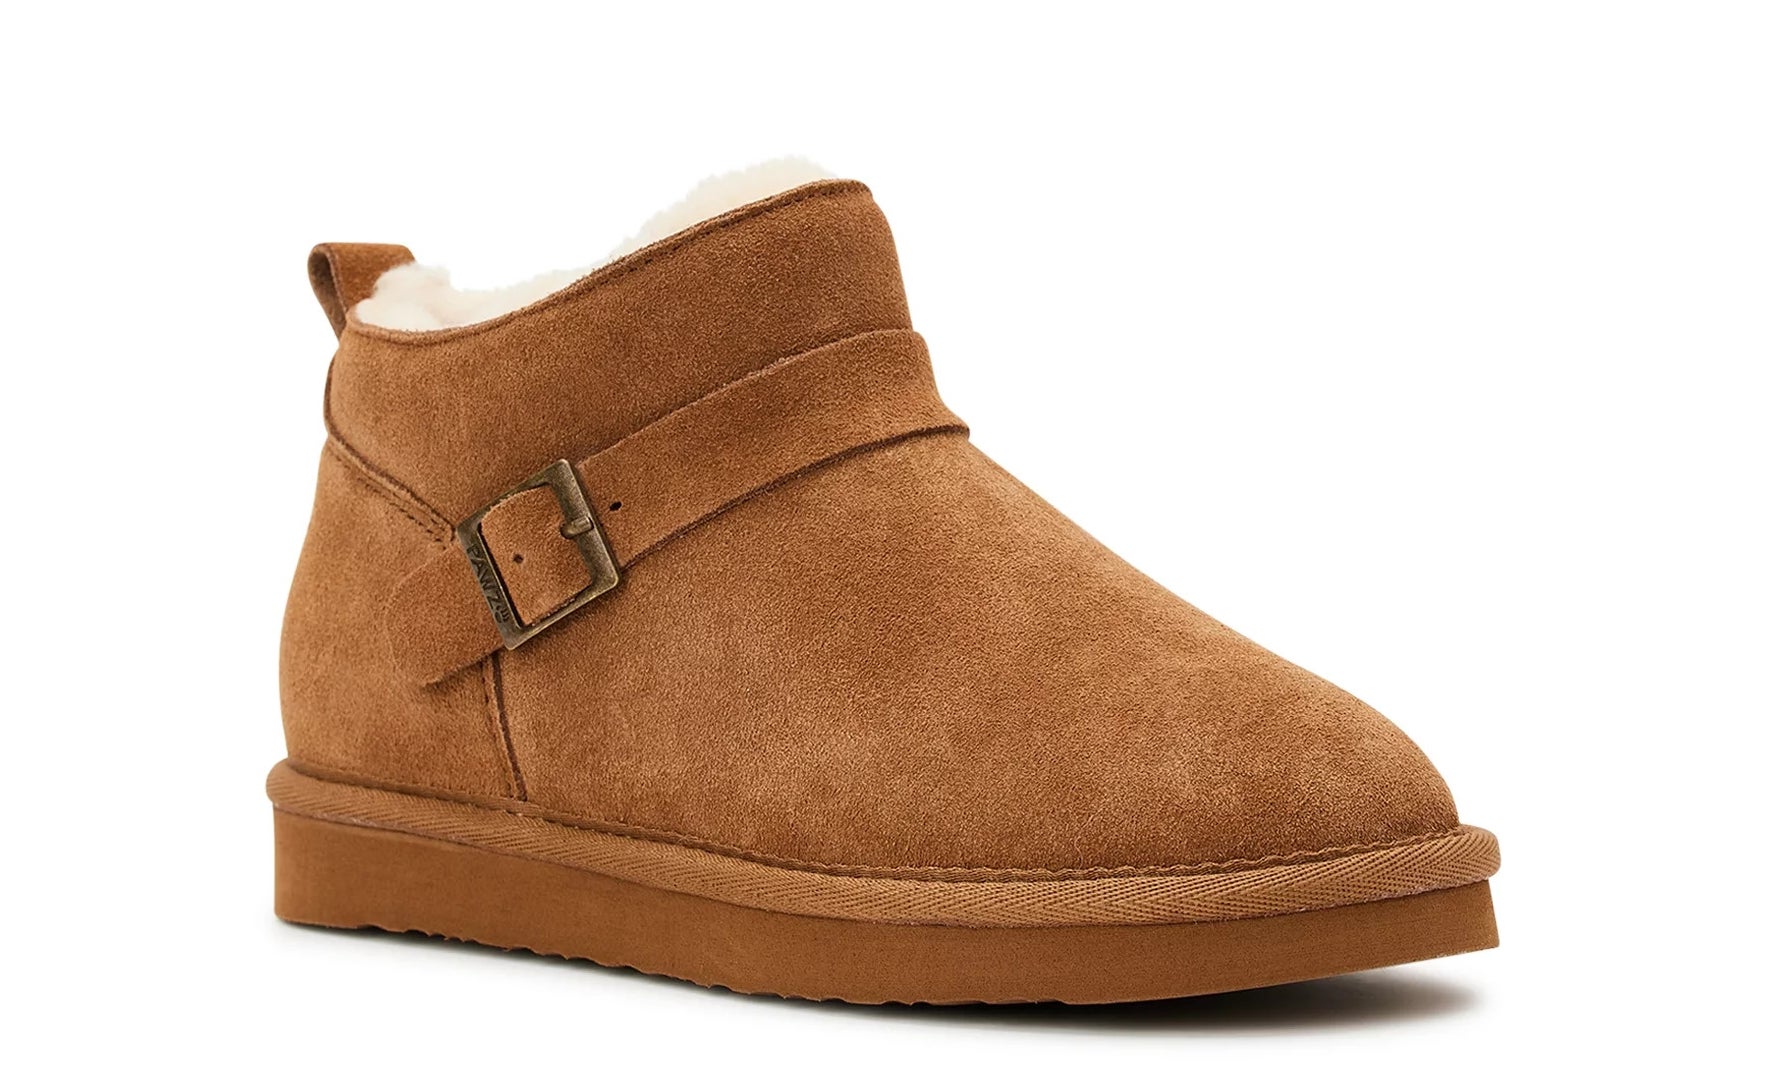 The boots in tan with white wool lining and a buckle detail on the side